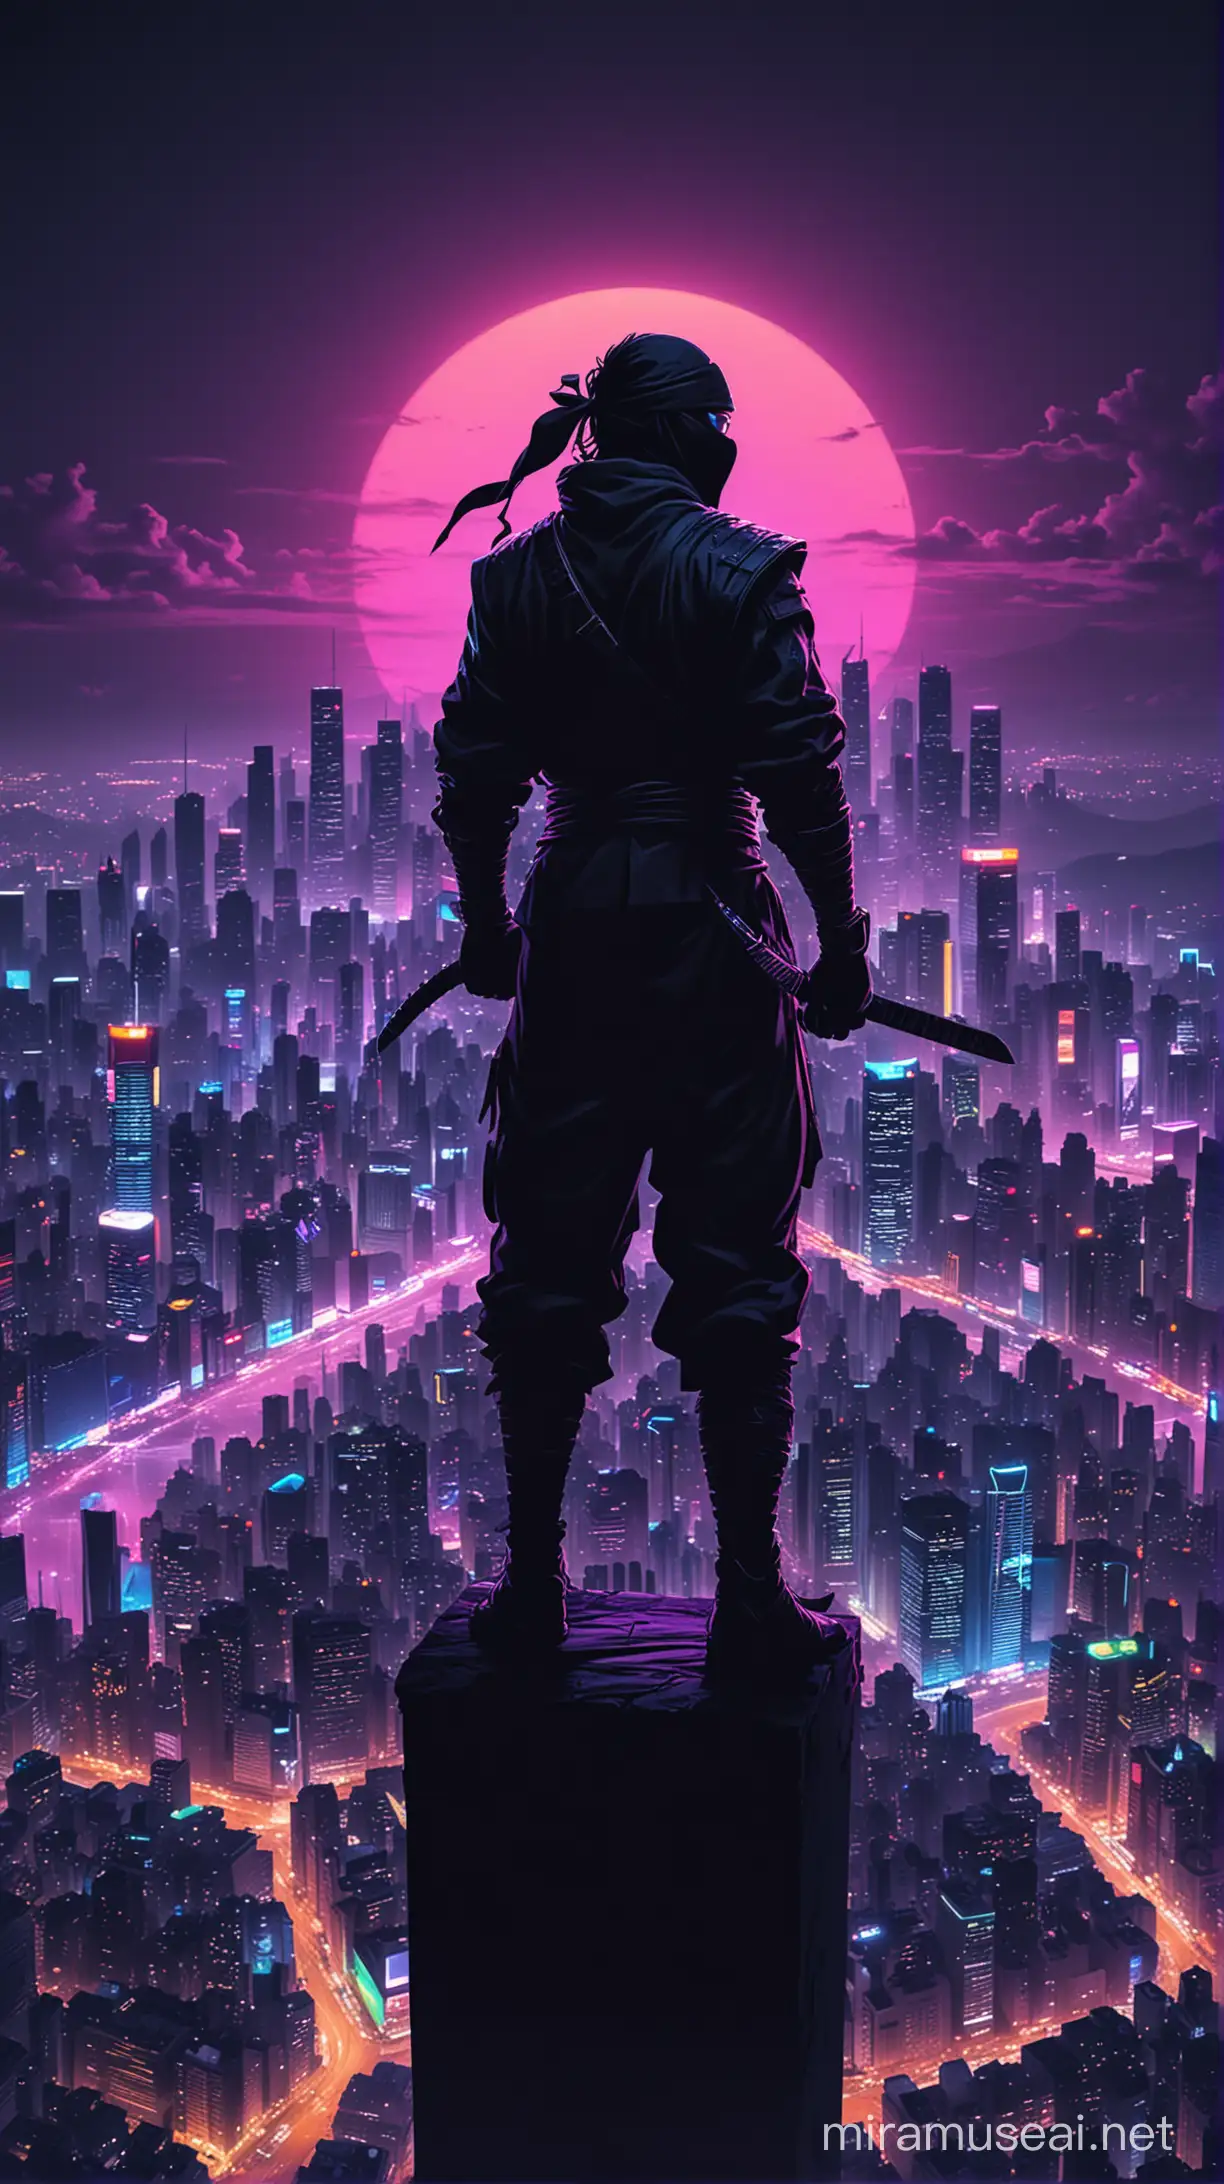 A vibrant cityscape at night, illuminated by neon lights in a spectrum of colors, with a shadowy figure of a ninja poised atop a skyscraper, overlooking the city. The ninja's silhouette is detailed by the neon glow, creating a striking contrast against the dark sky.